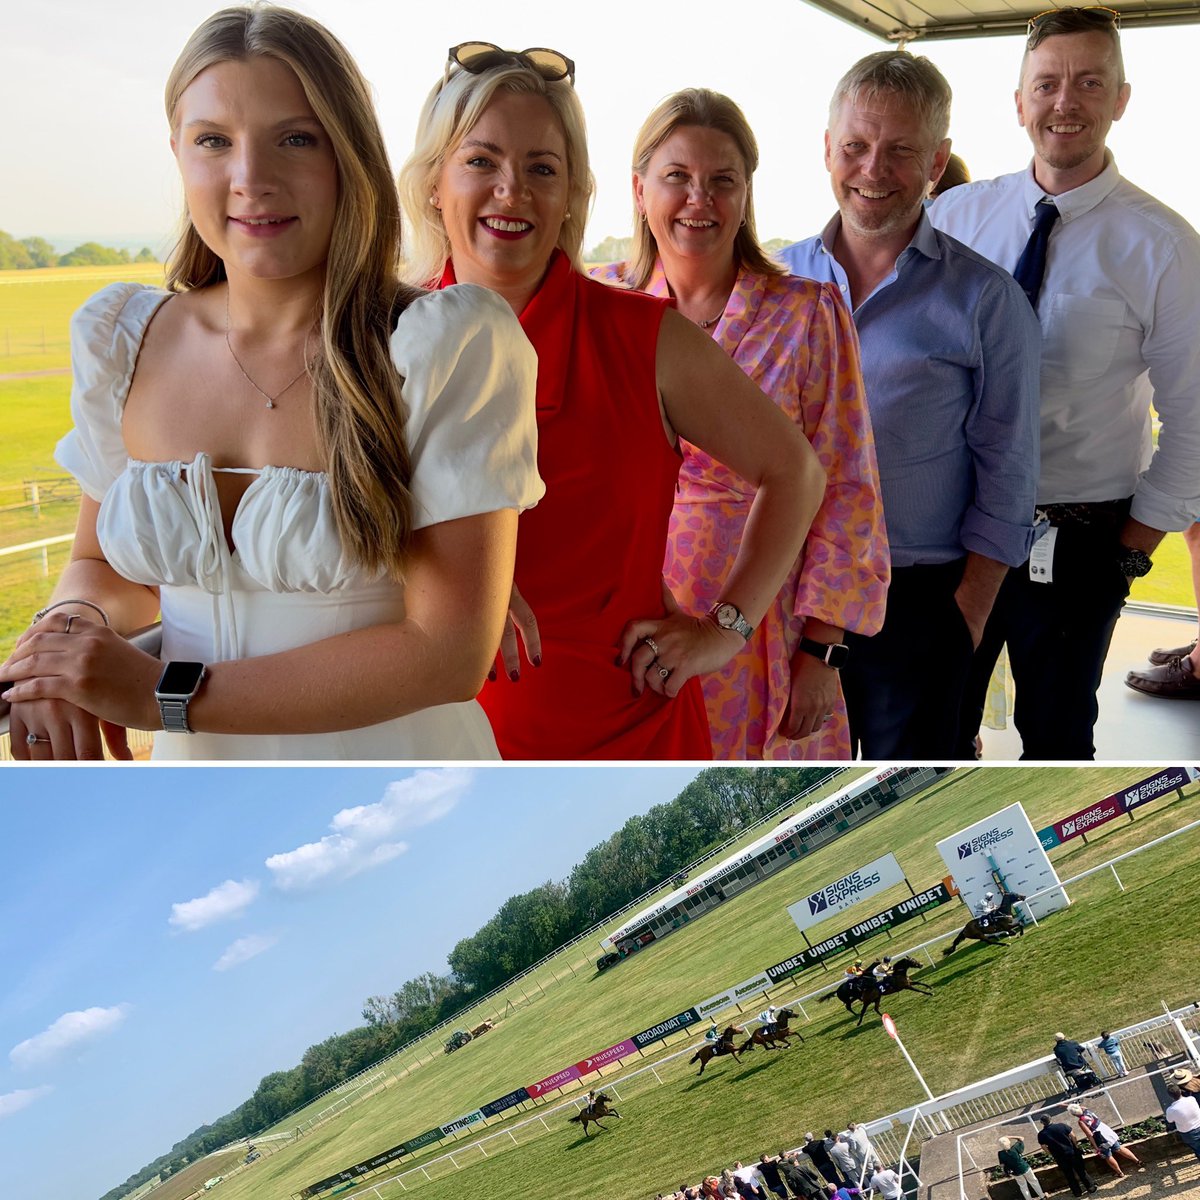 What a great way to spend yesterday afternoon! 

Very many thanks to Maria Lawless for the invite to @BathRacecourse to the BITA event. Lovely people in a beautiful setting. 

#NetworkingWorks #YouNeverKnow

@1kevincampbell @AshMindSet @vanillaweb @sallybradyltd @johno_67